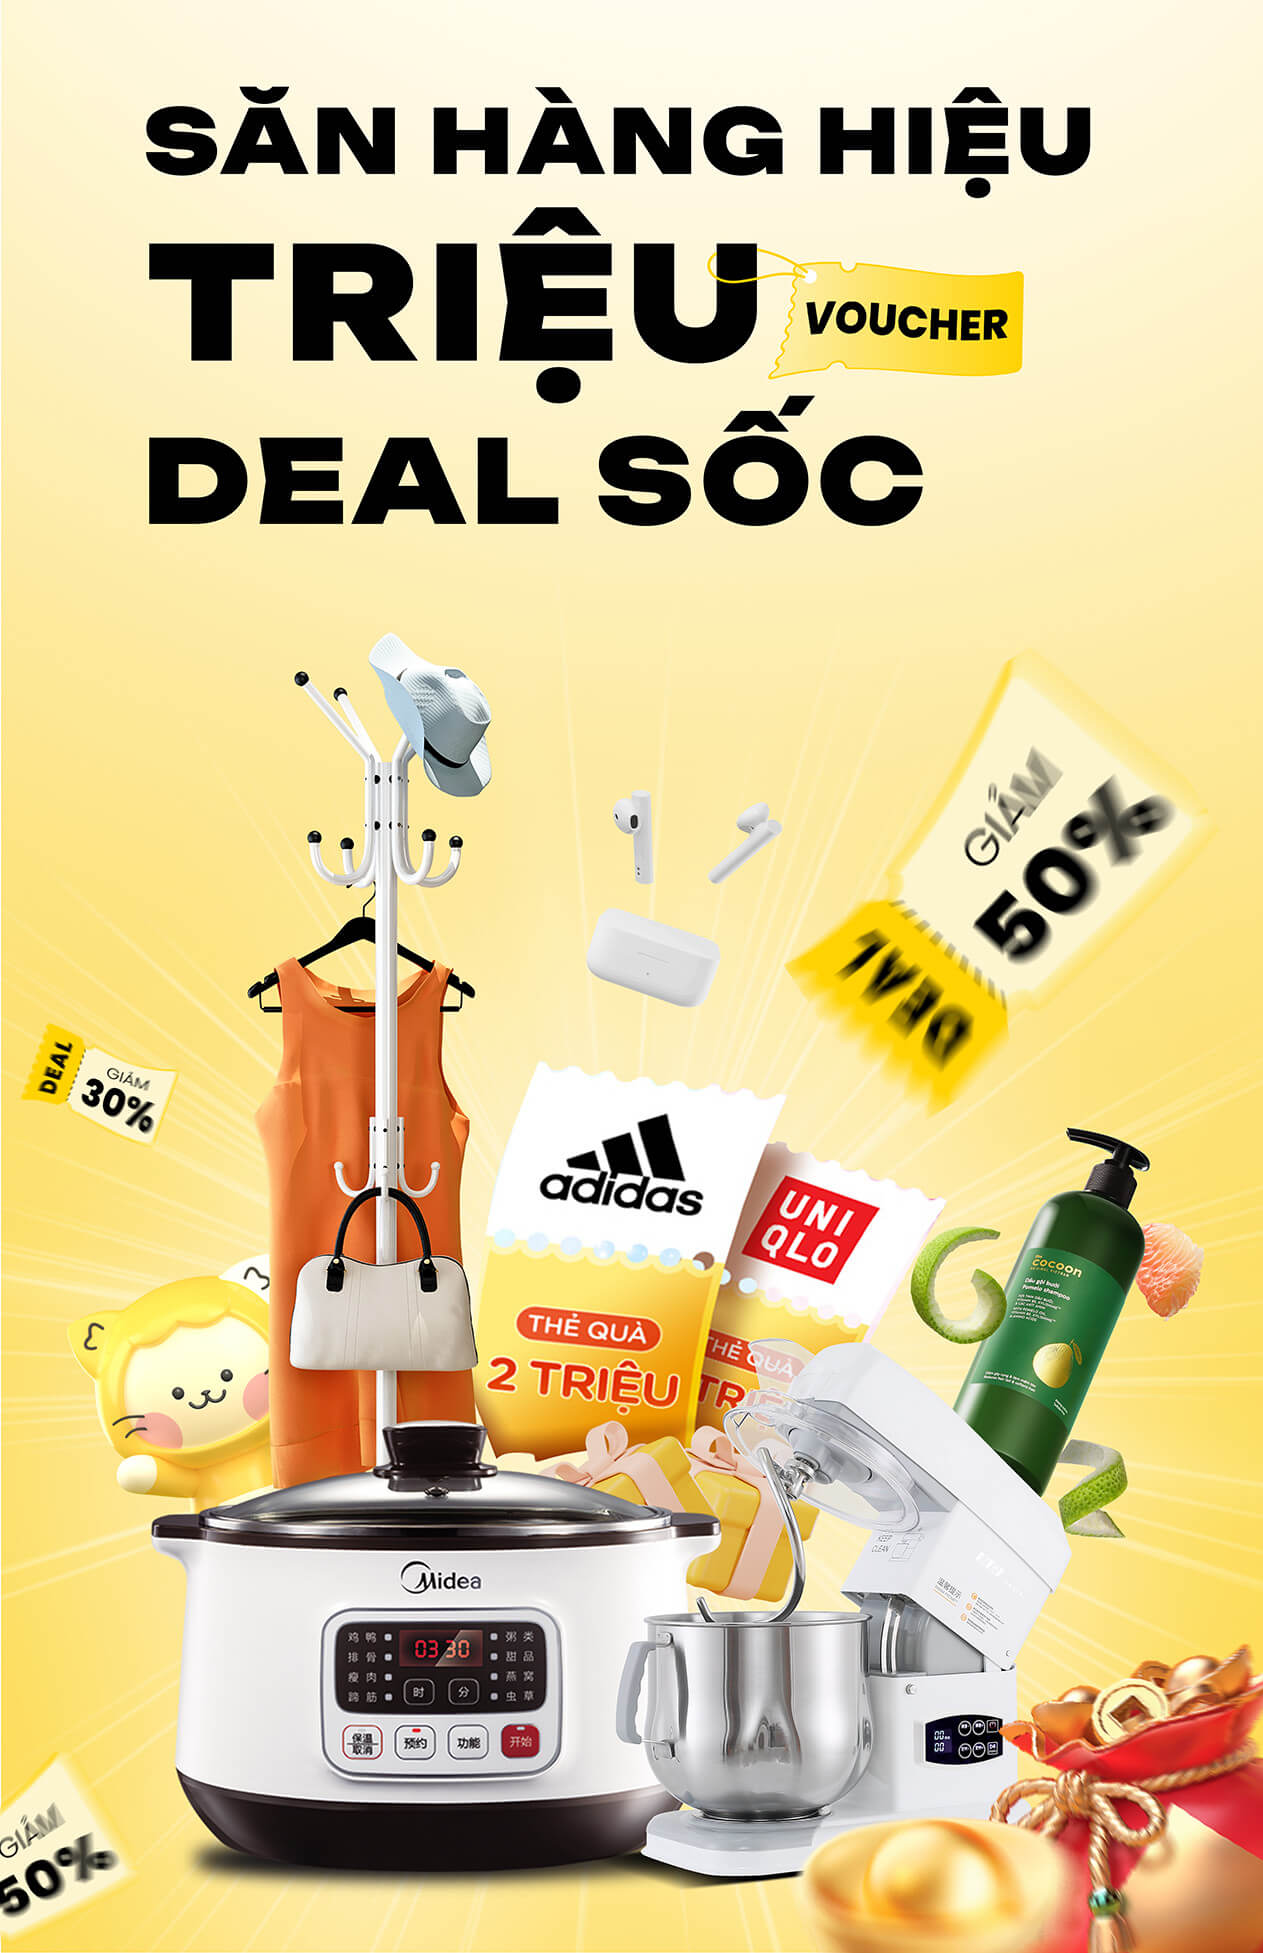 DEAL_BRAND_IMAGE